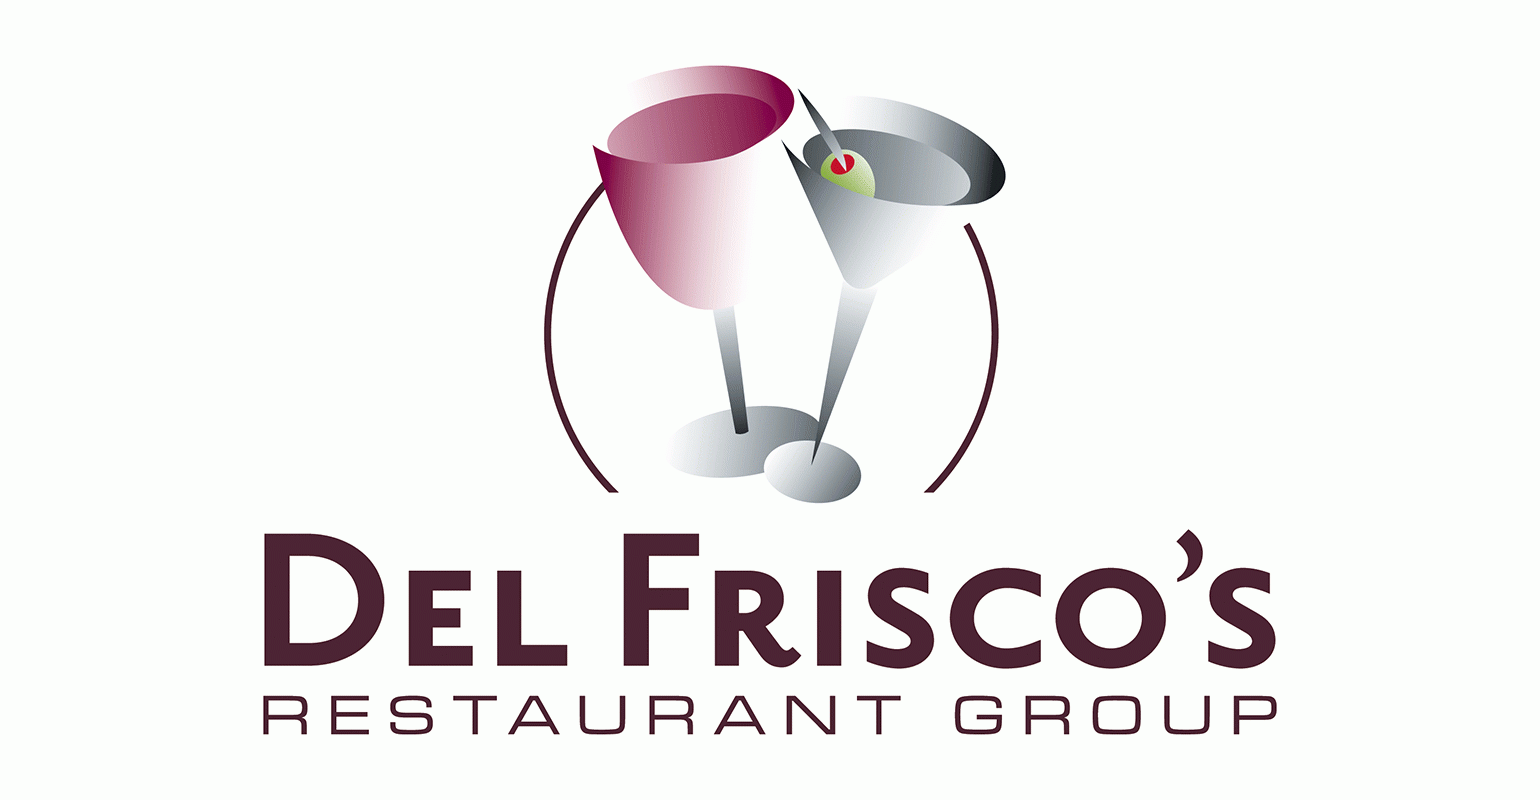 Del Frisco's Restaurant Group bought by L Catterton in $650M deal